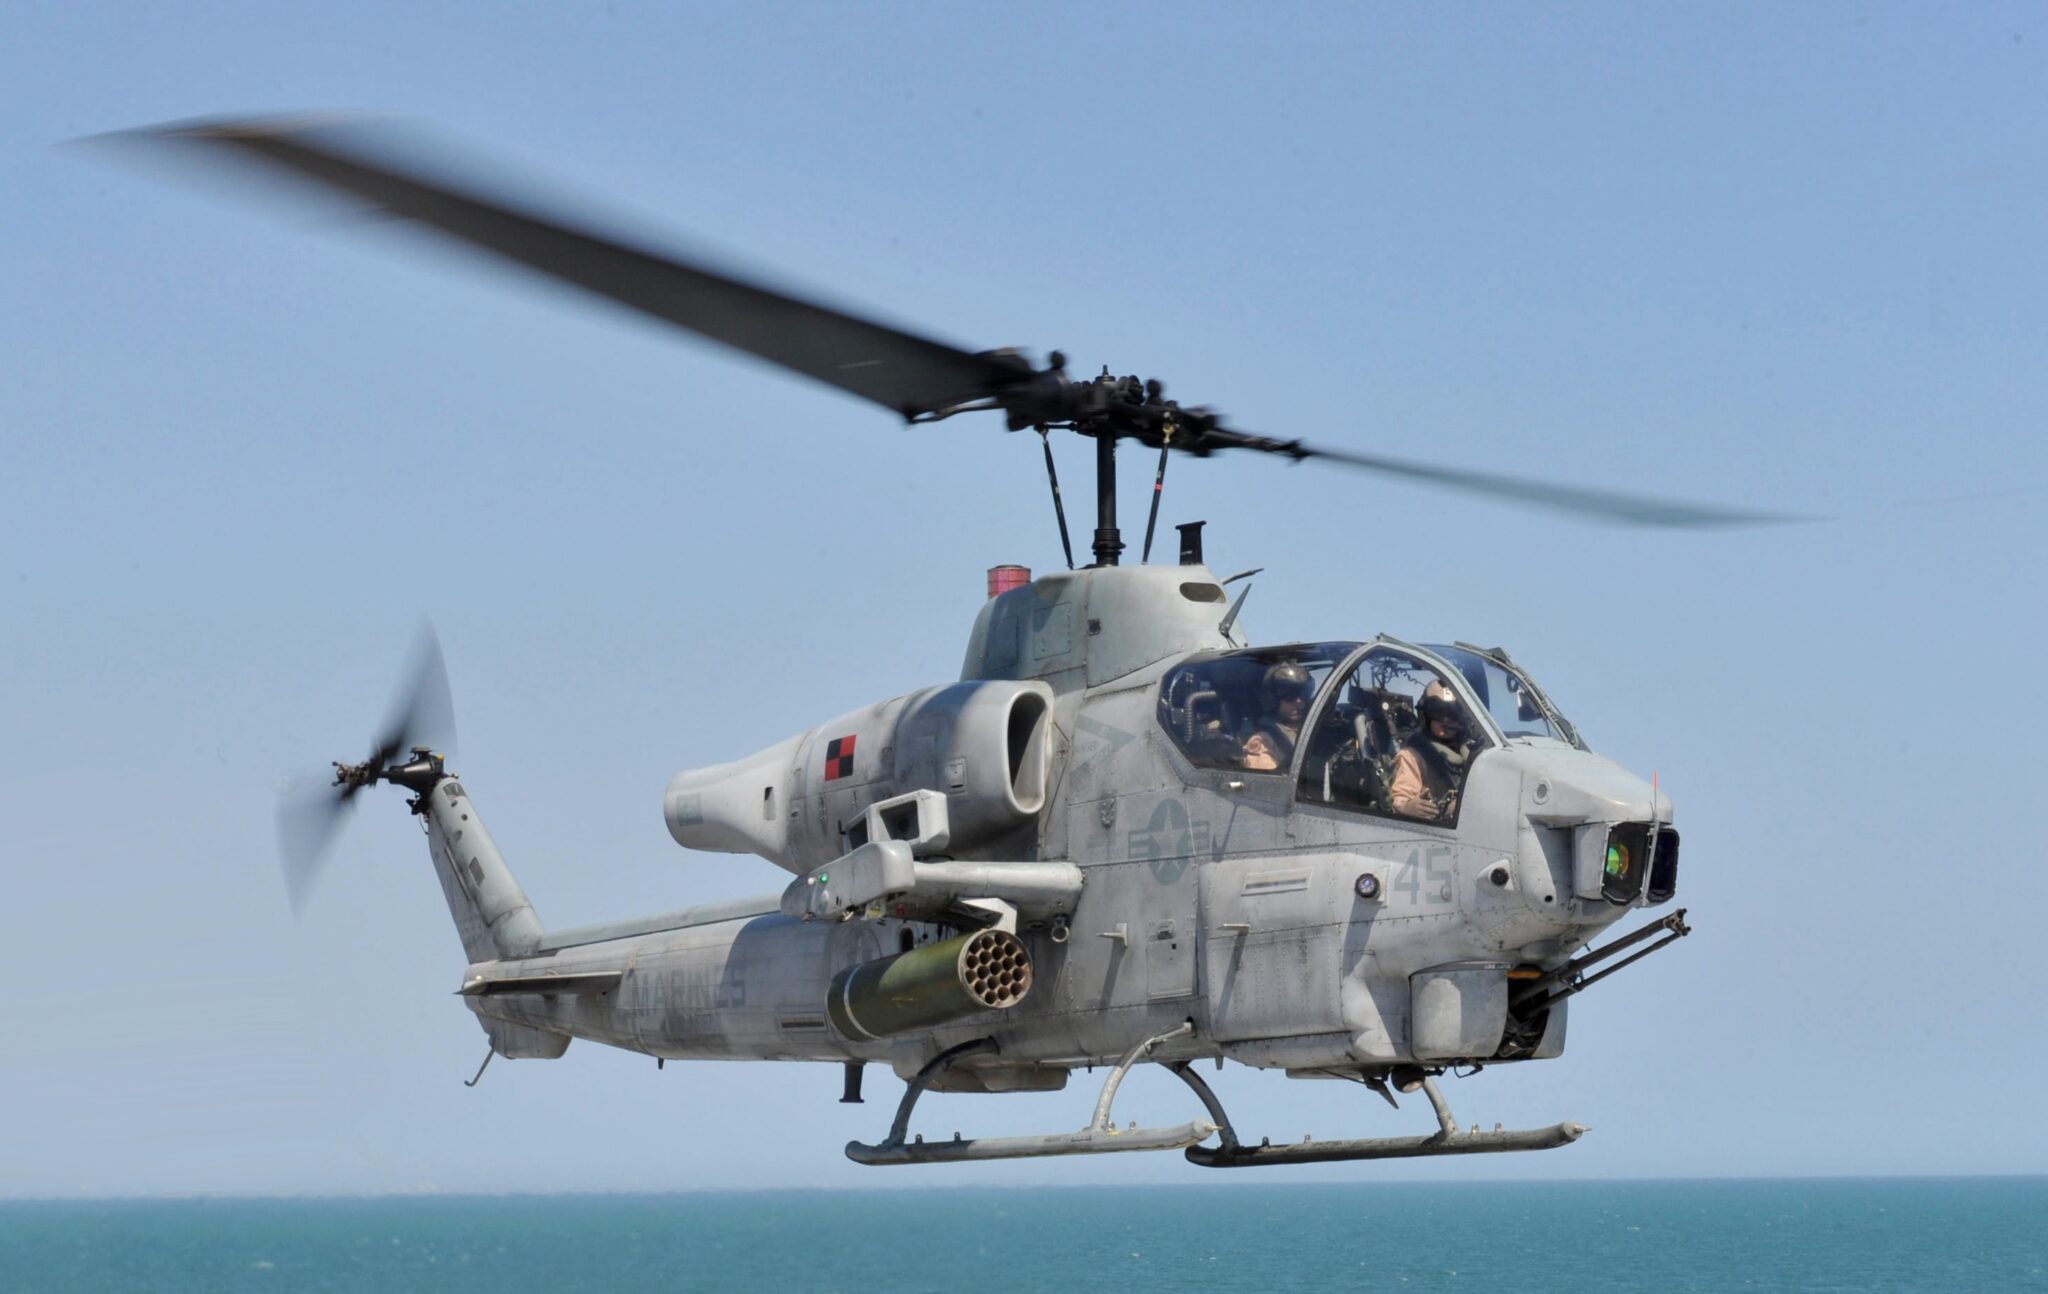 Nigeria announces very ambitious plan to acquire several dozen aircraft and helicopters 